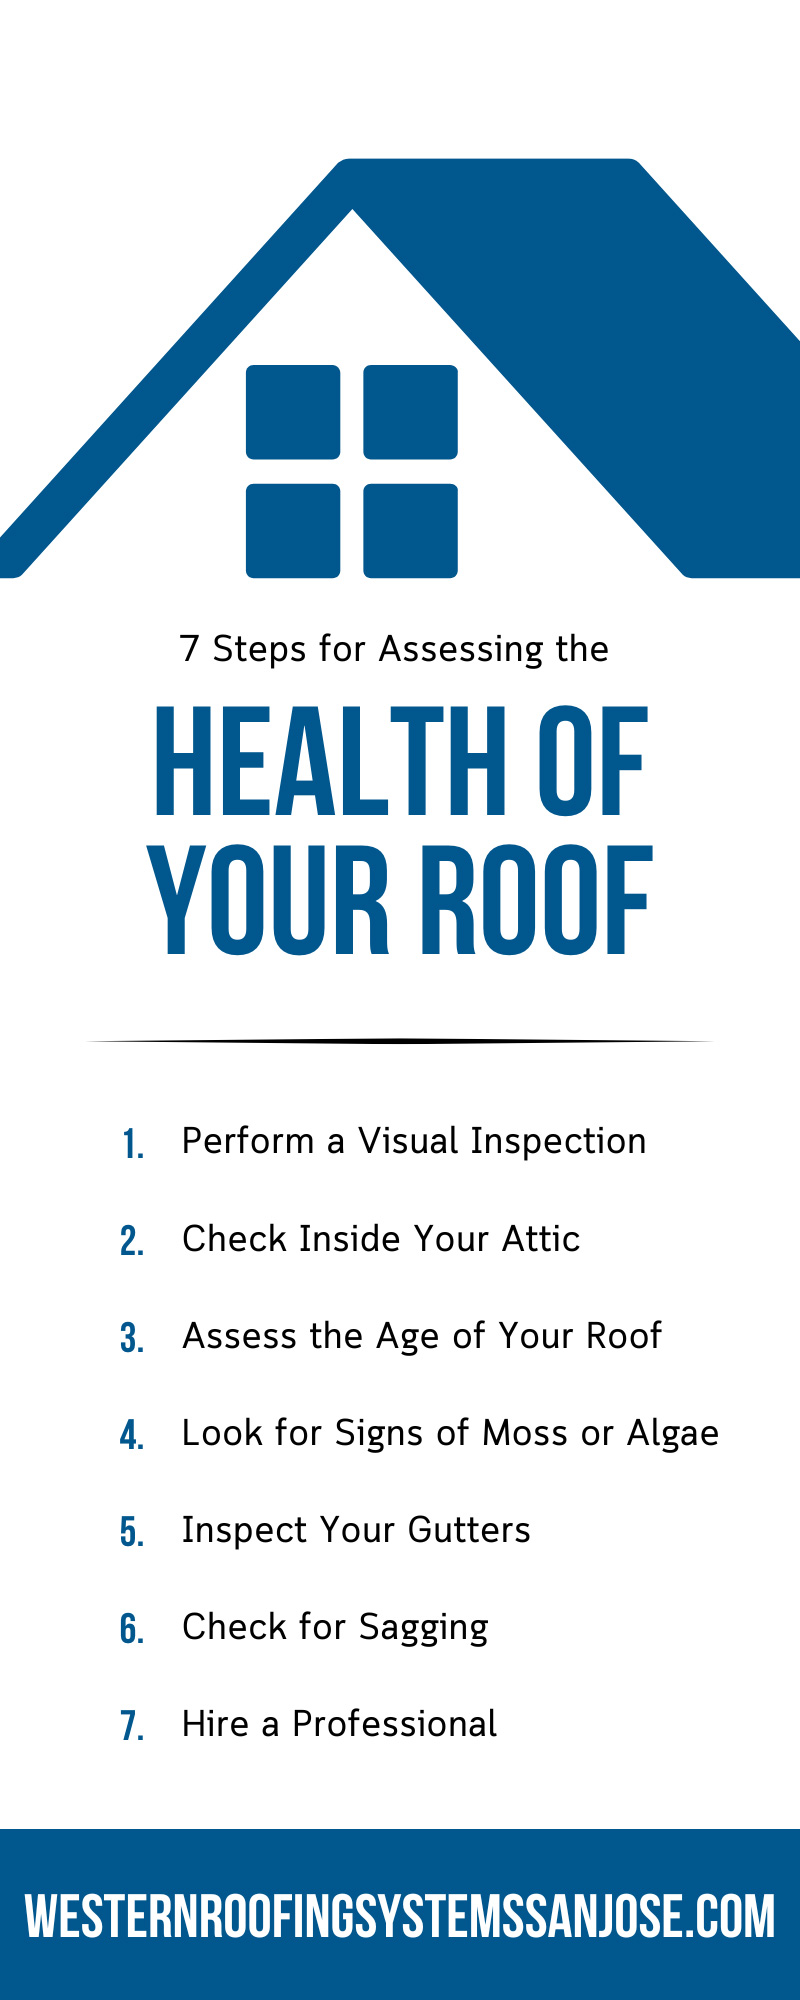 7 Steps for Assessing the Health of Your Roof